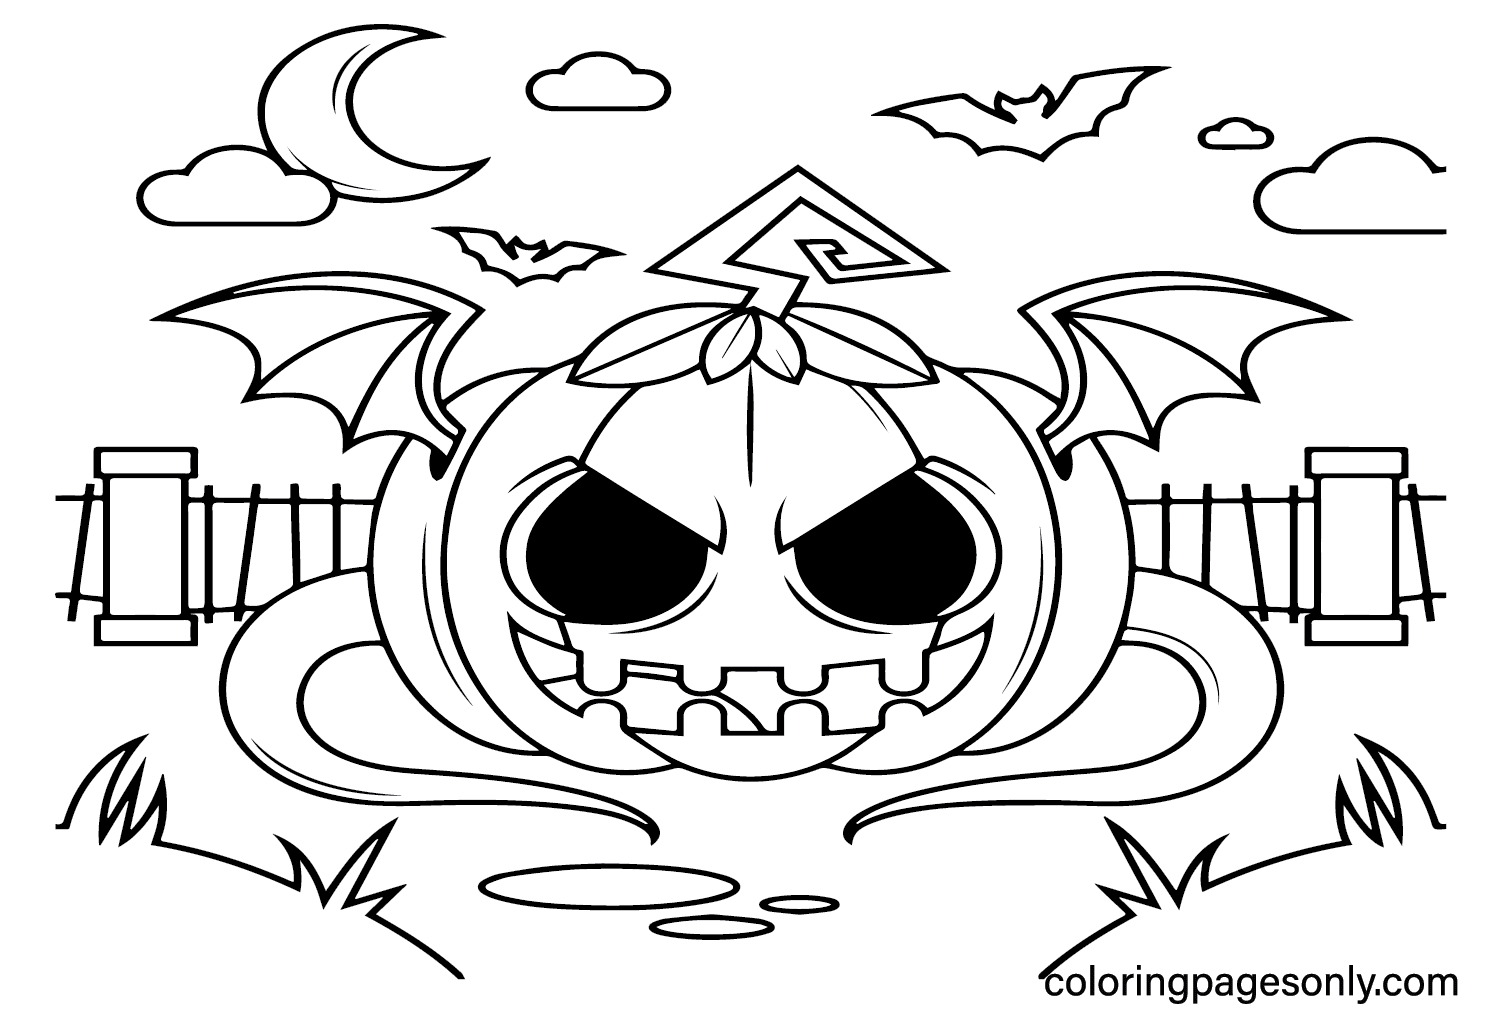 Scary Halloween Coloring Pages Printable from Scary Halloween